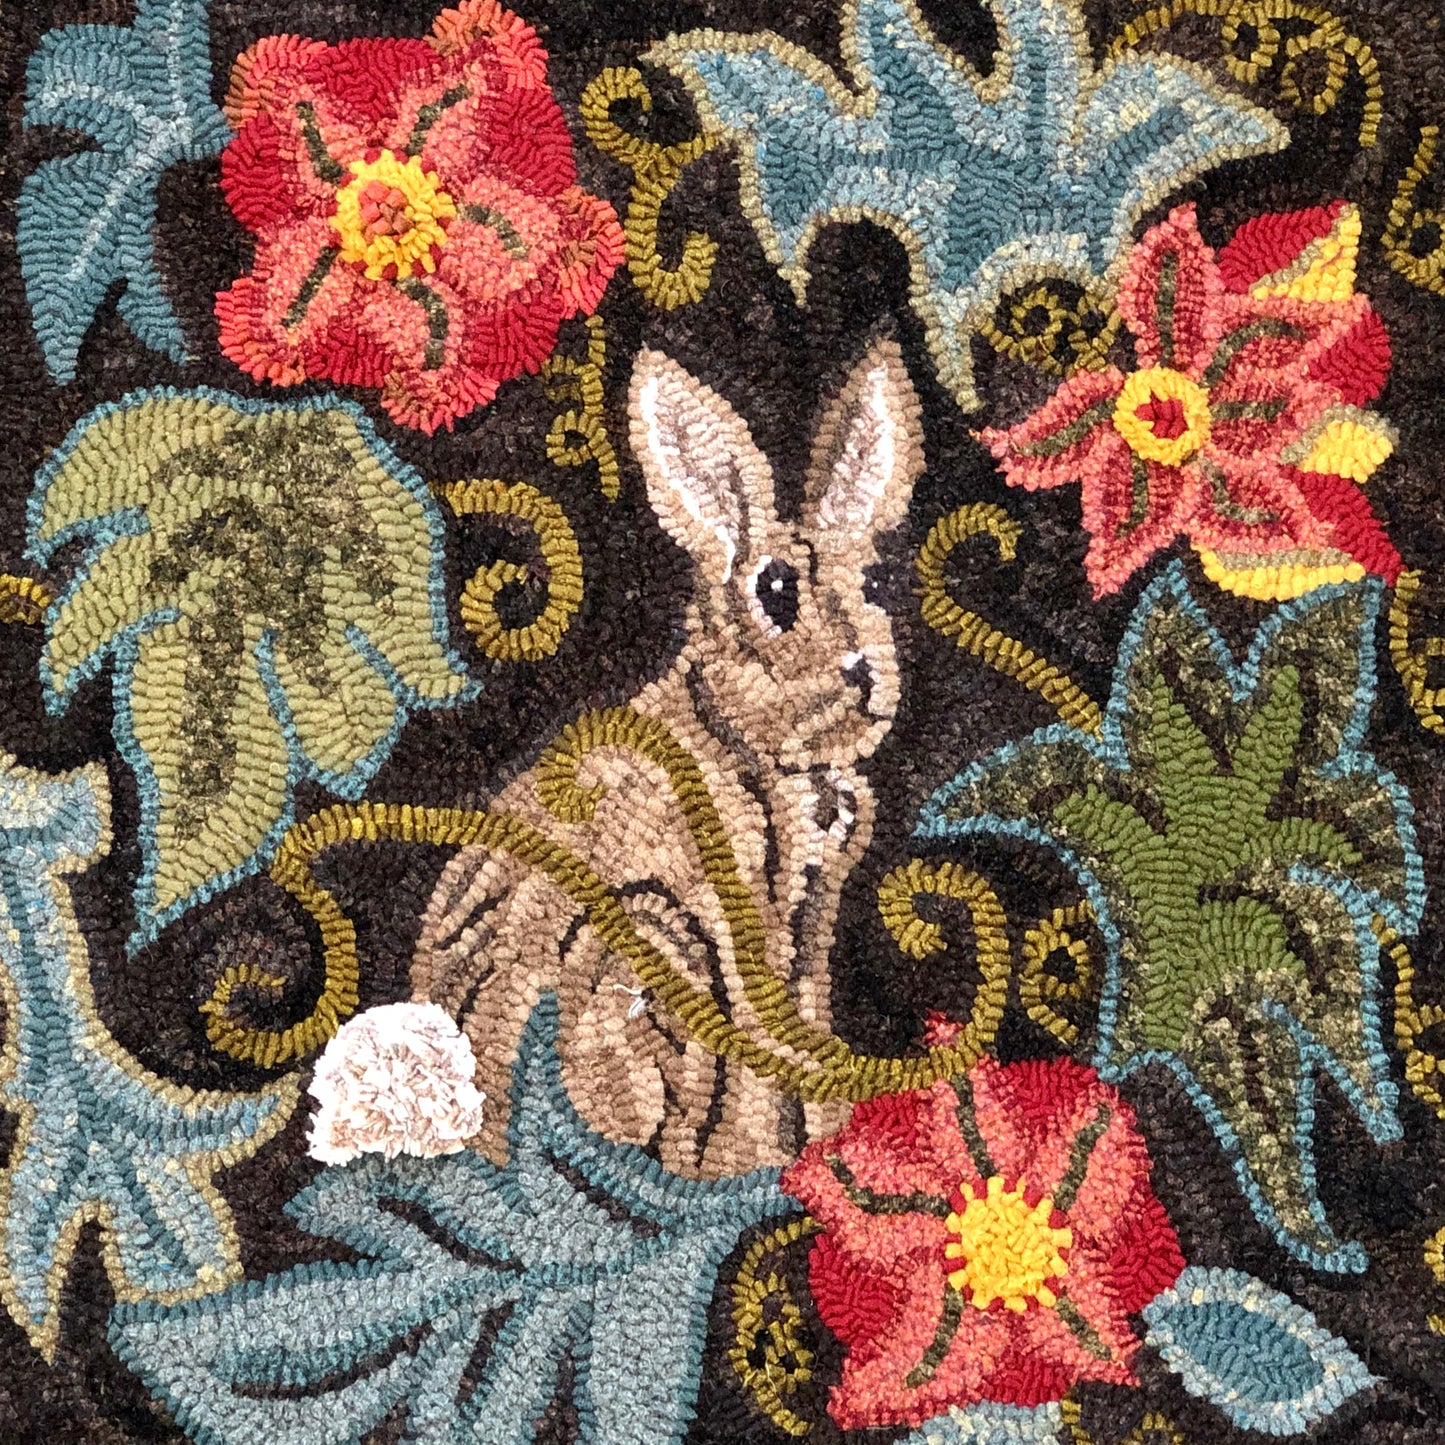 Garden Rabbit Rug Hooking Pattern on natural linen, perfect for rug hooking and oxford rug punch needle. Lovely rabbit pattern with flowers and leaves.